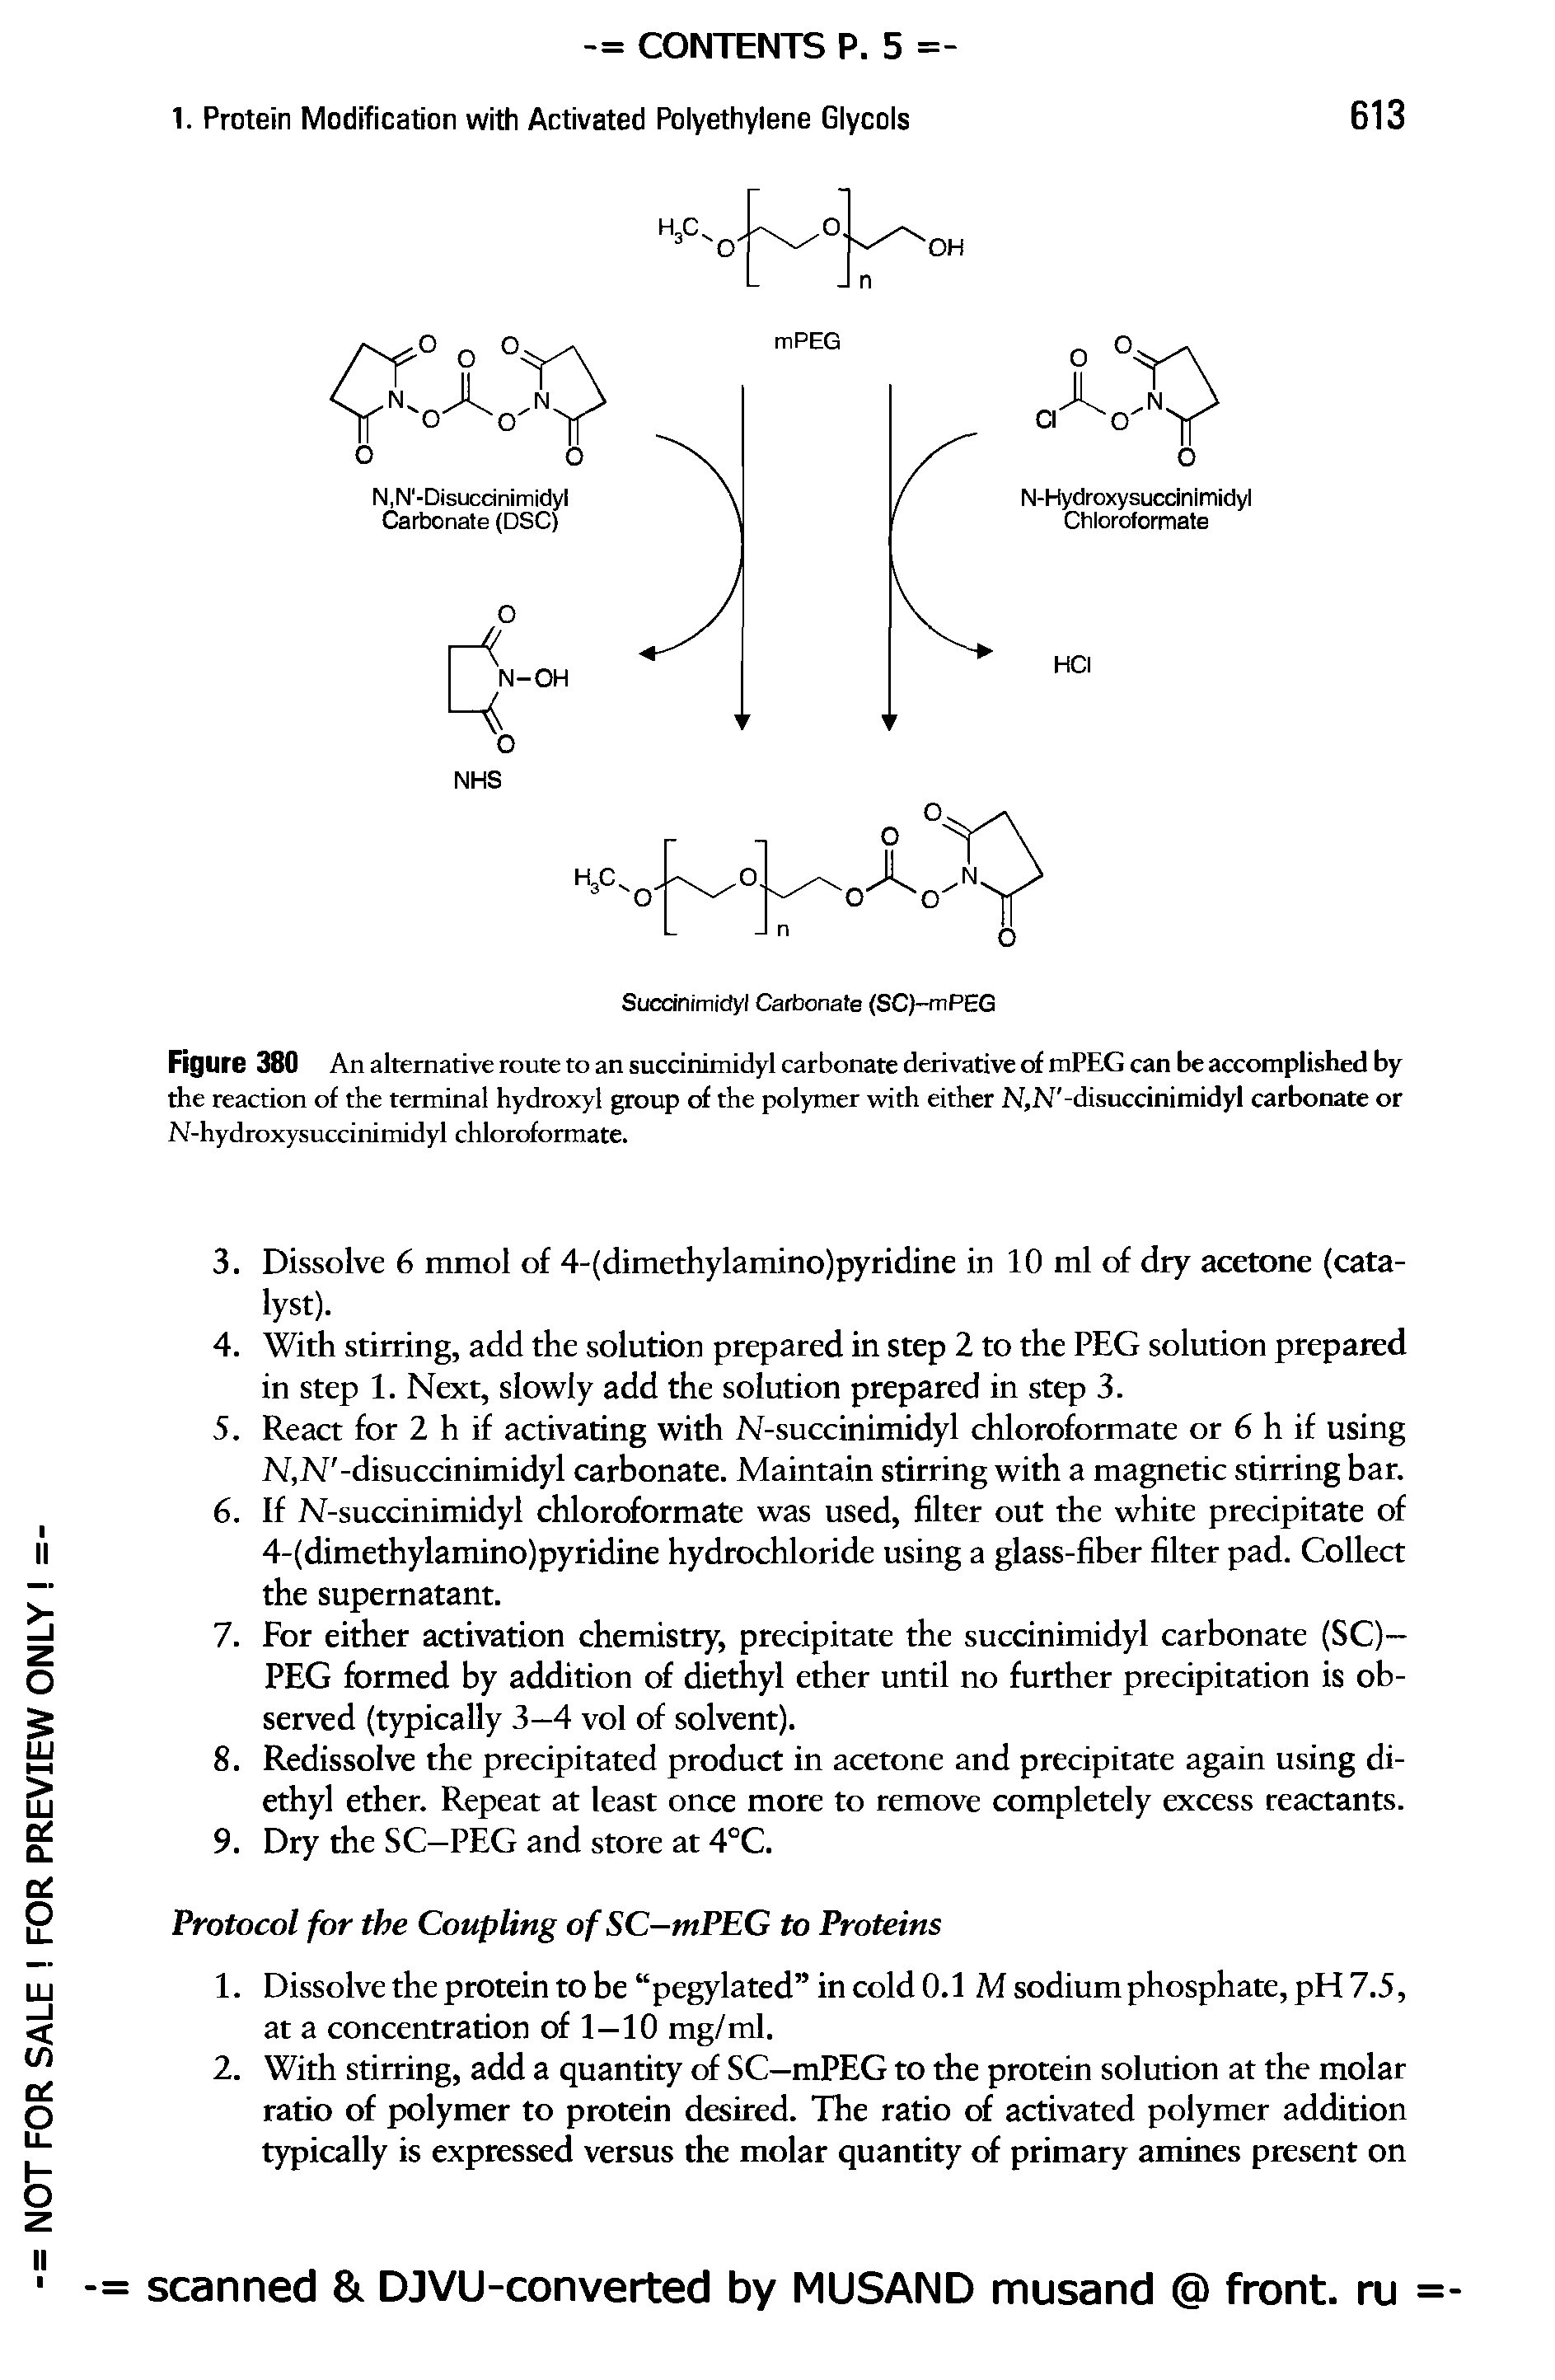 Figure 380 An alternative route to an succinimidyl carbonate derivative of mPEG can be accomplished by the reaction of the terminal hydroxyl group of the polymer with either N,N -disuccinimidyl carbonate or N-hydroxysuccinimidyl chloroformate.